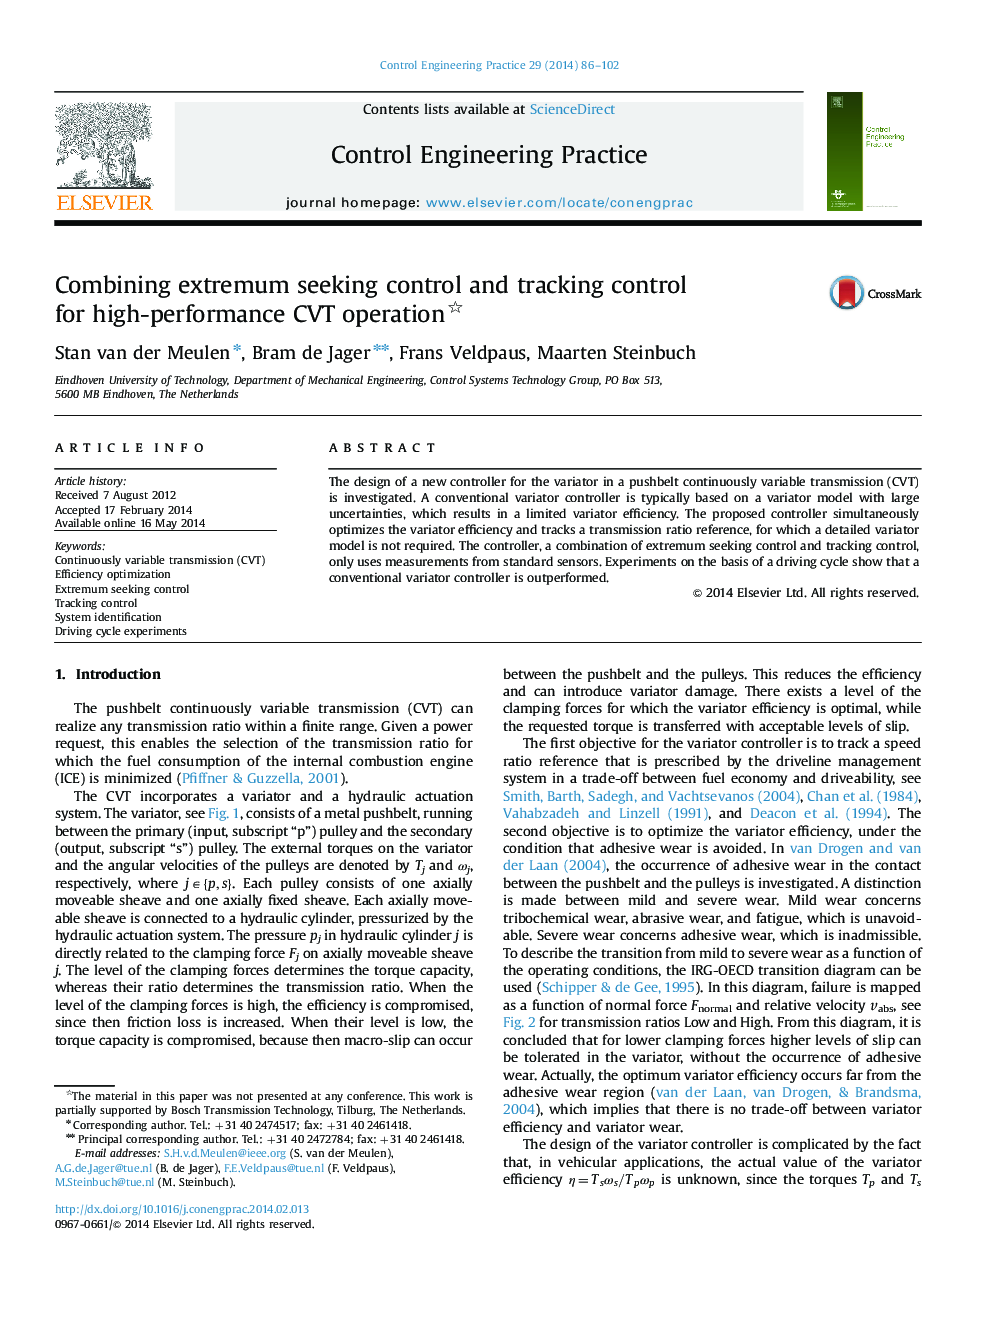 Combining extremum seeking control and tracking control for high-performance CVT operation 